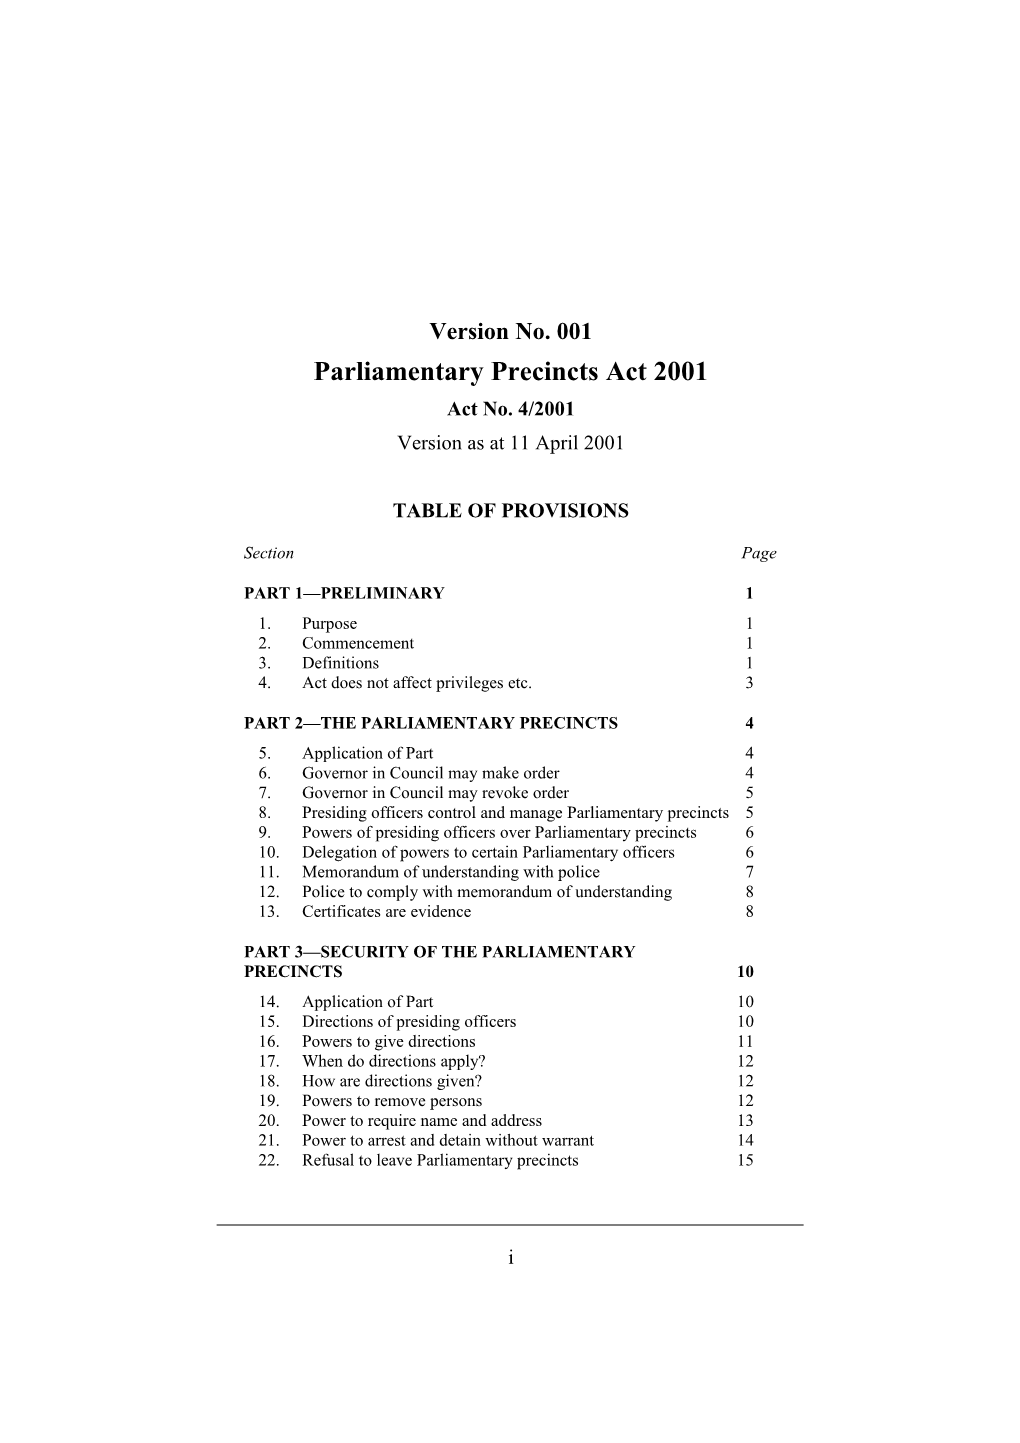 Parliamentary Precincts Act 2001